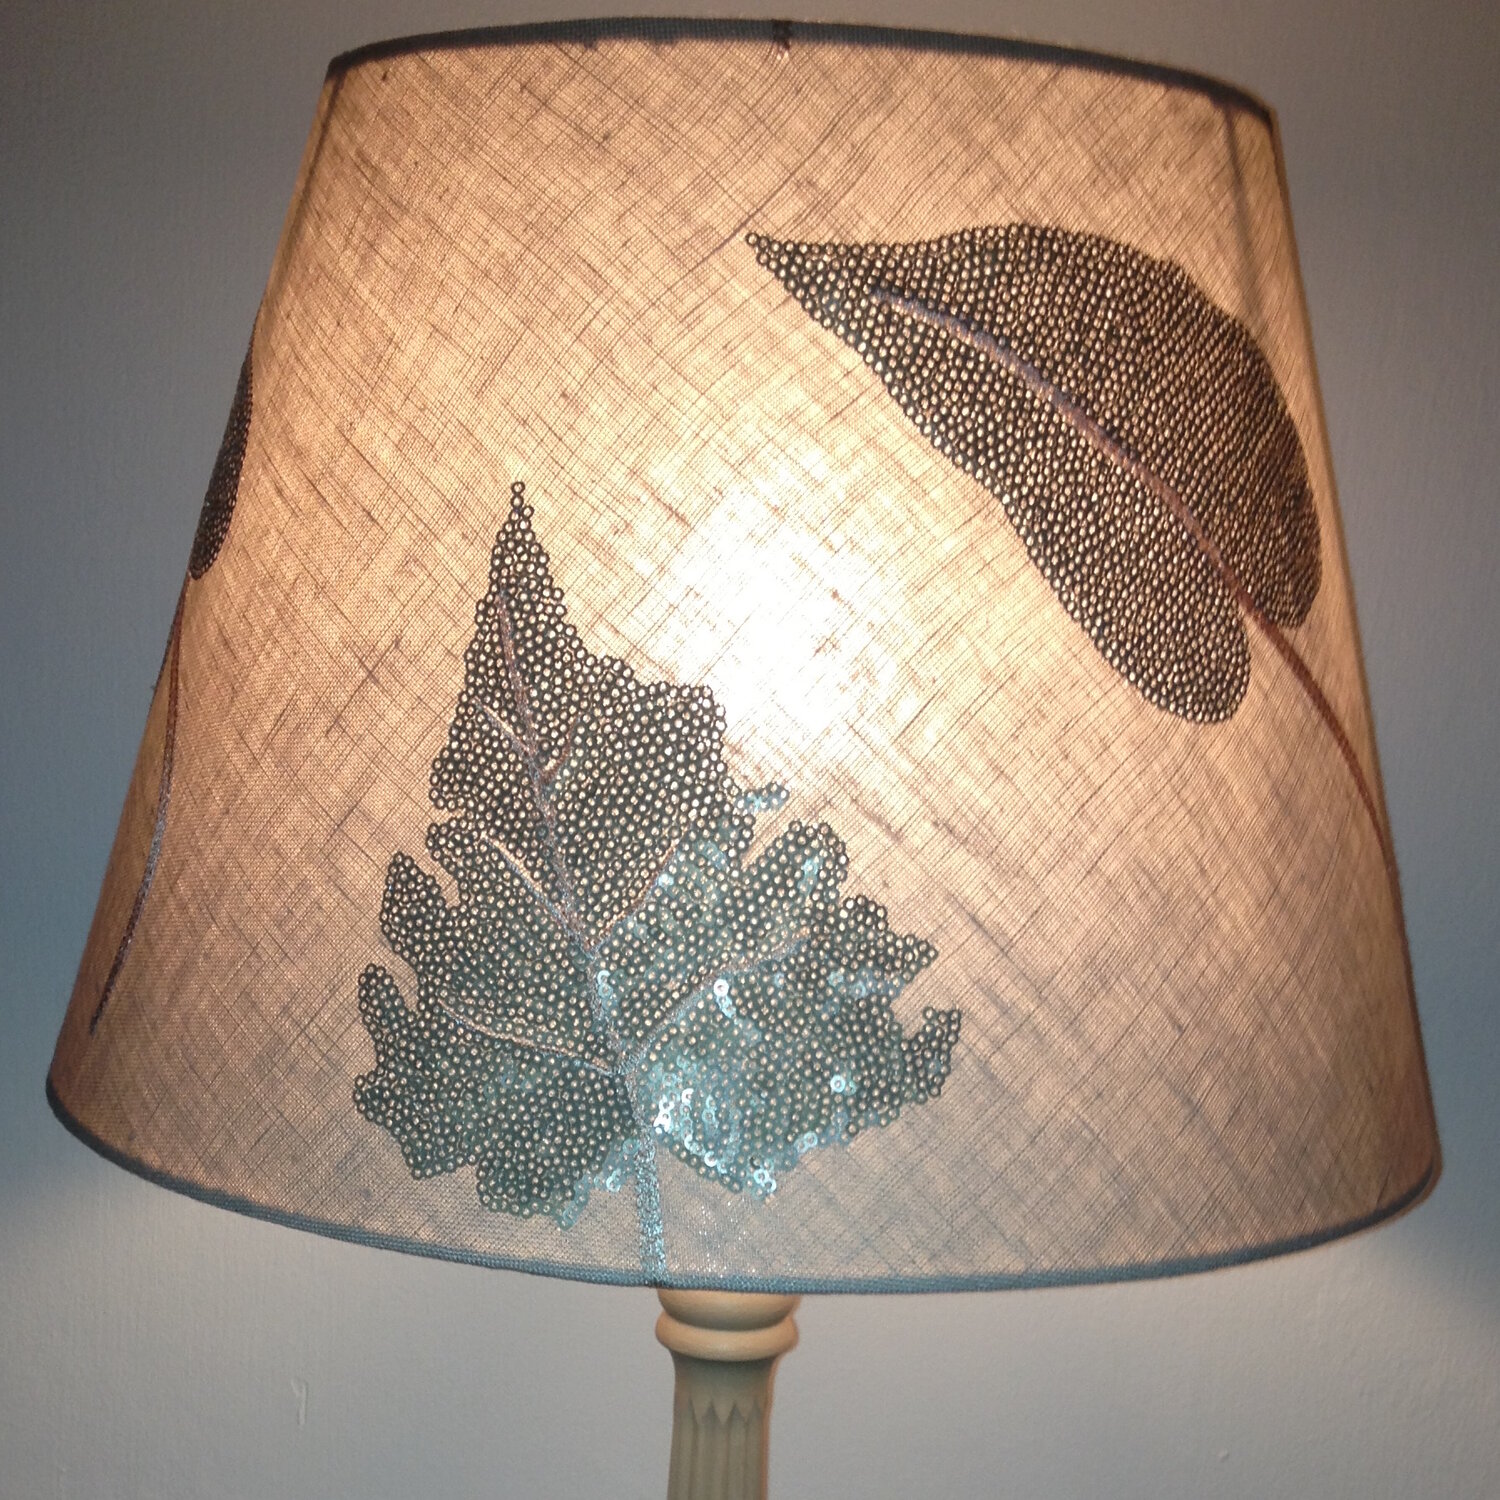 Lamp Shade Coverings Feature, How To Cover A Lampshade With Fabric